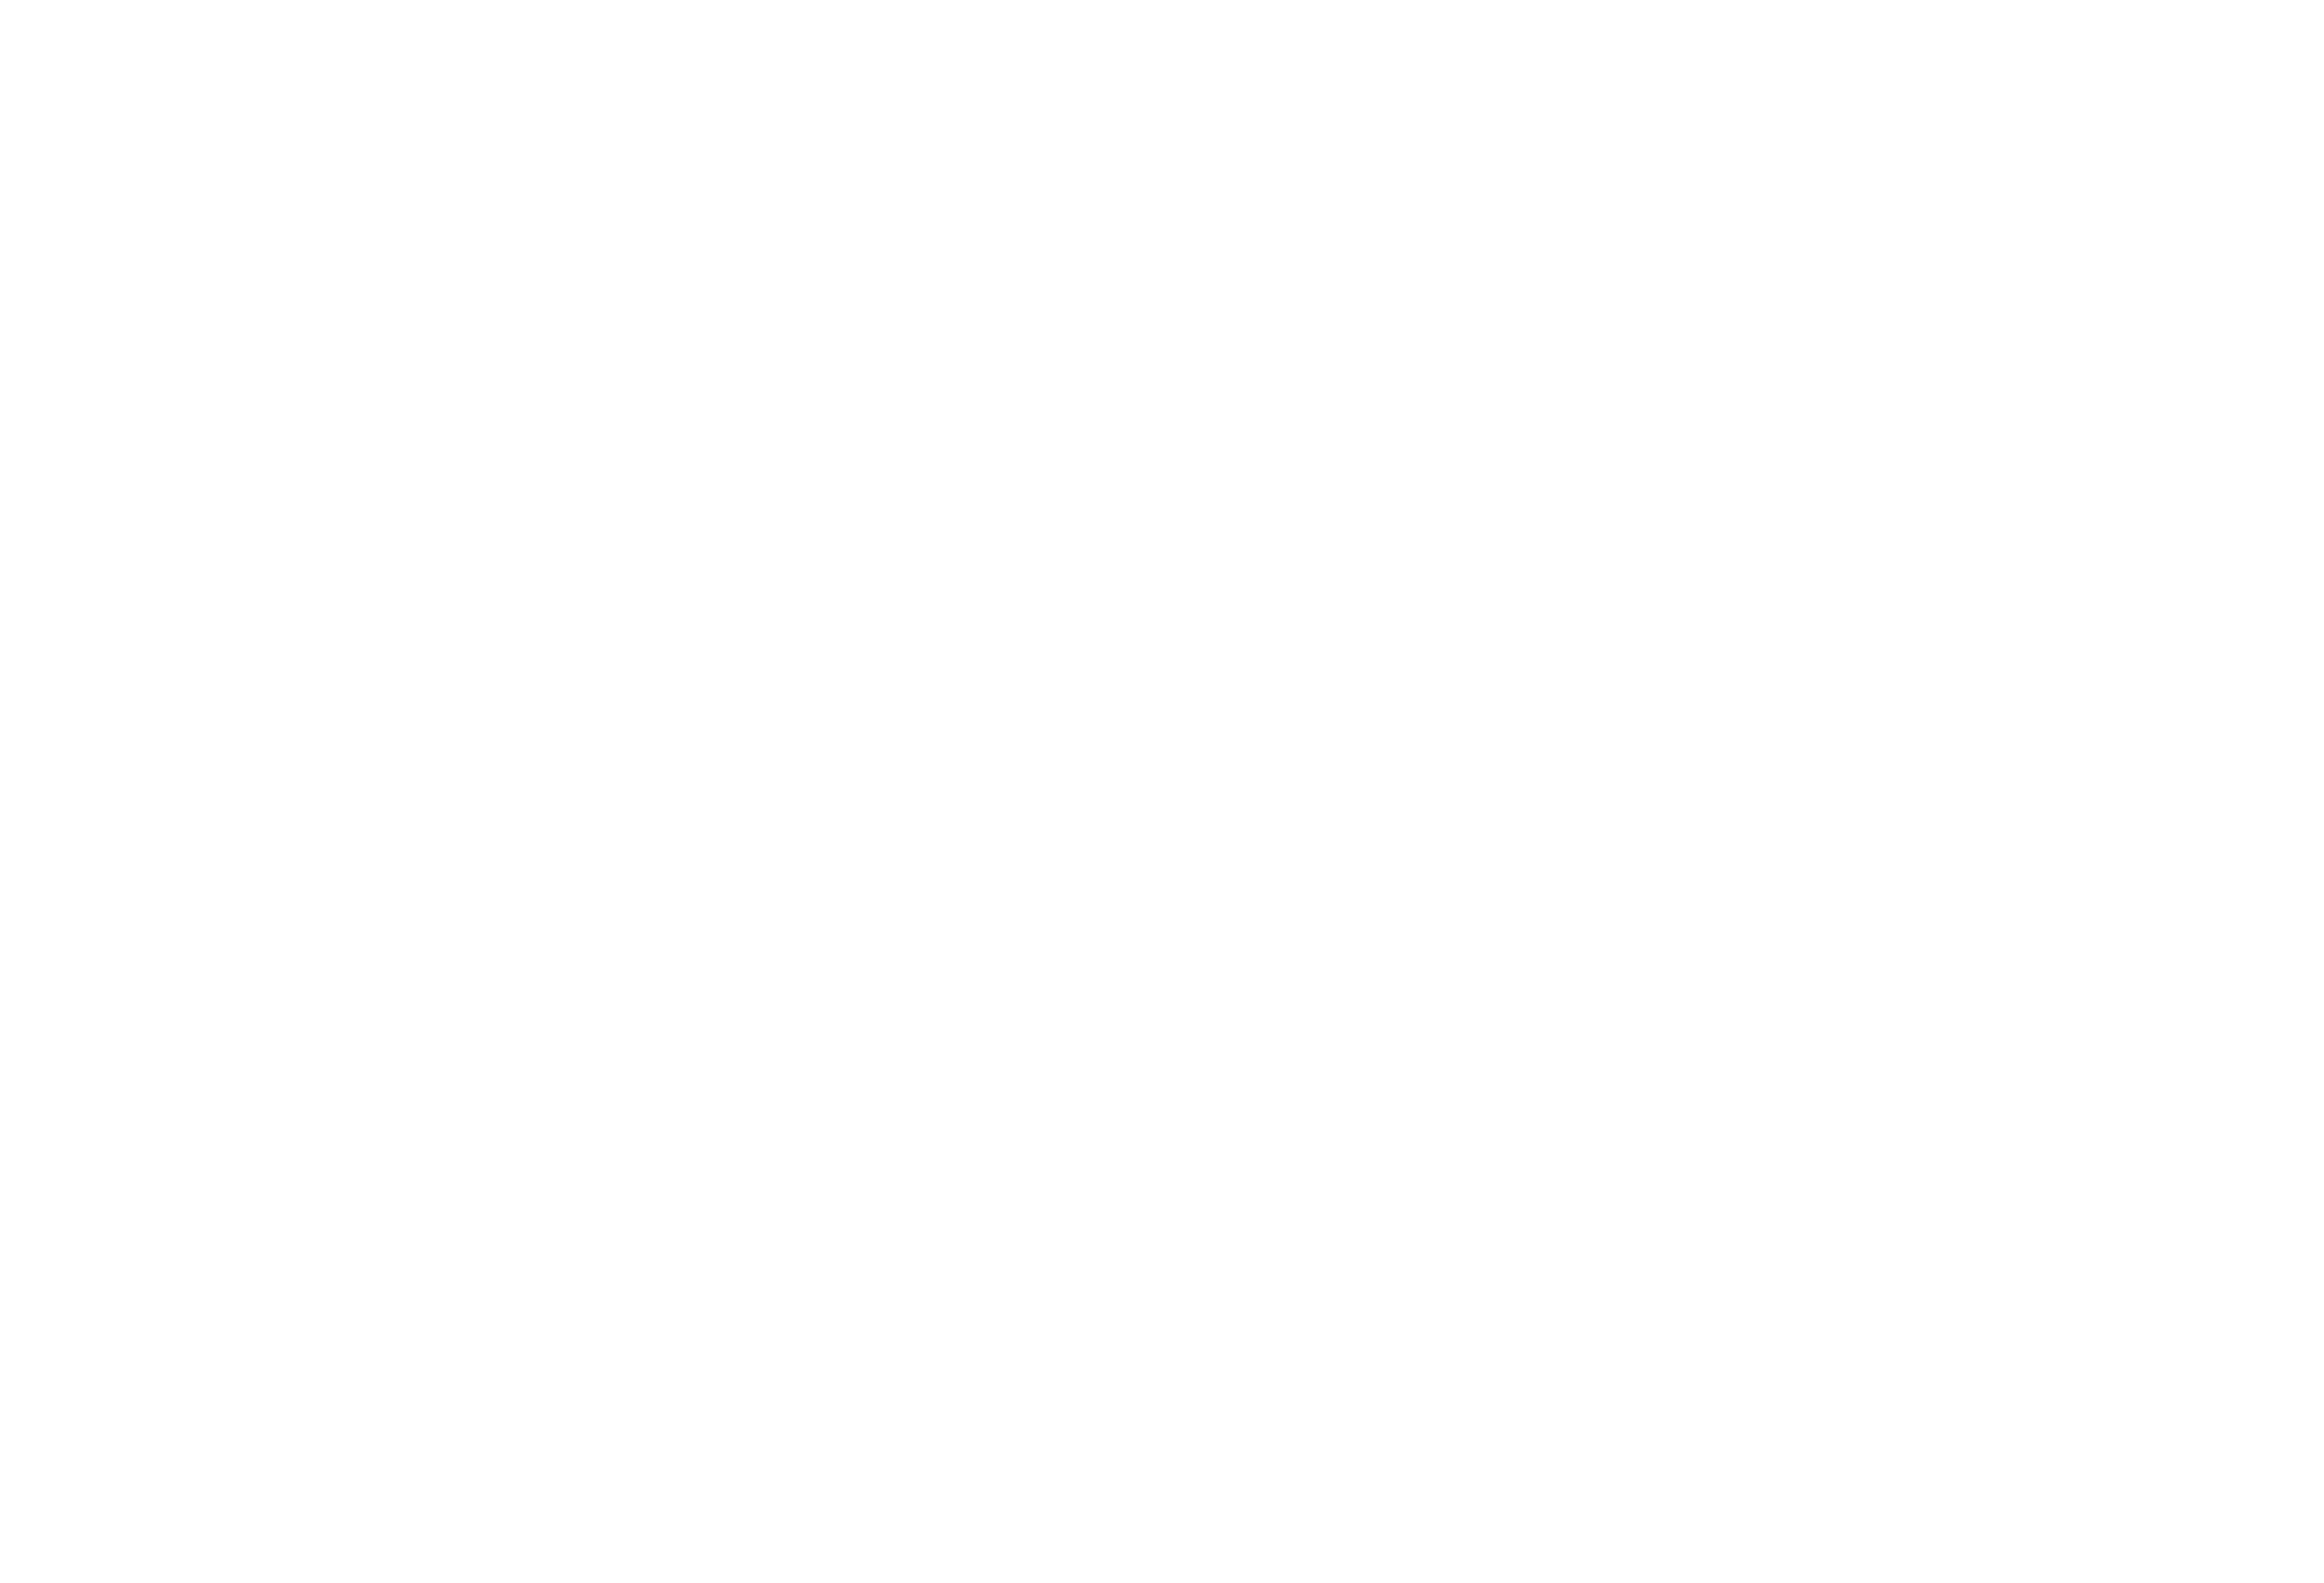 Twin Feathers logo